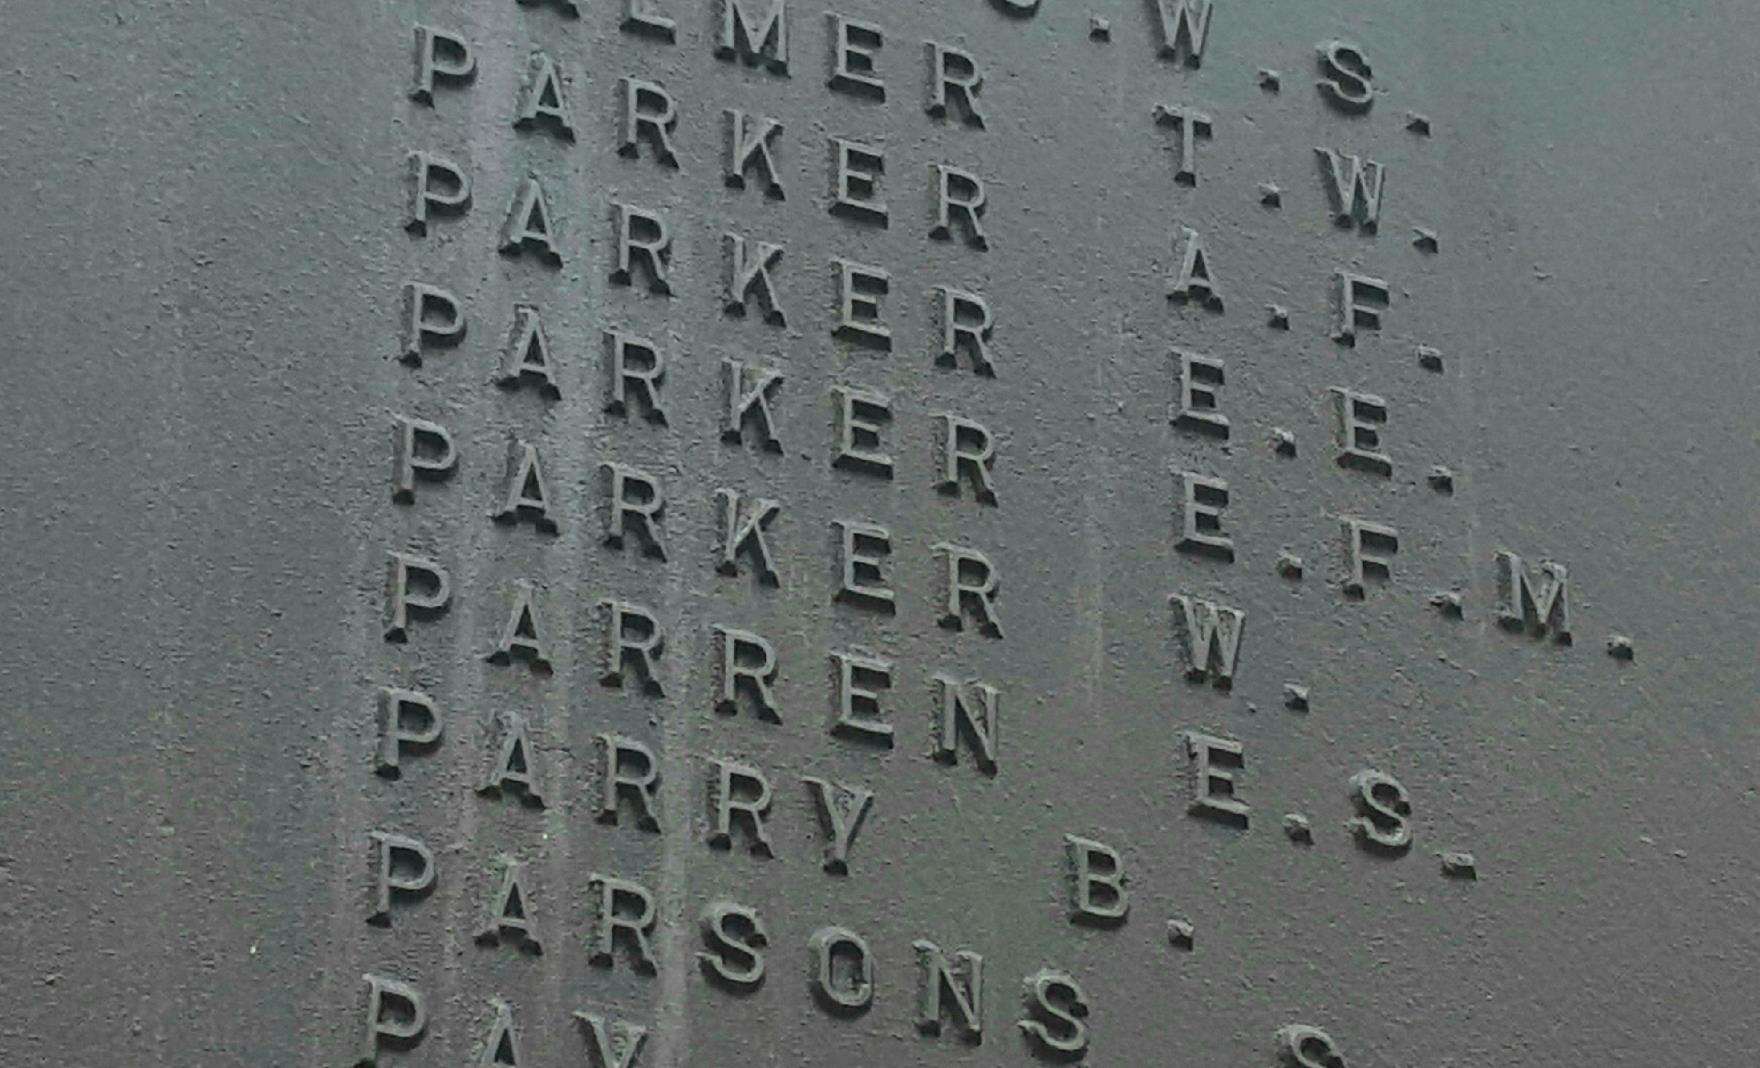 Ethel Parker is the only woman commemorated on the Buttermarket war memorial (2225771)